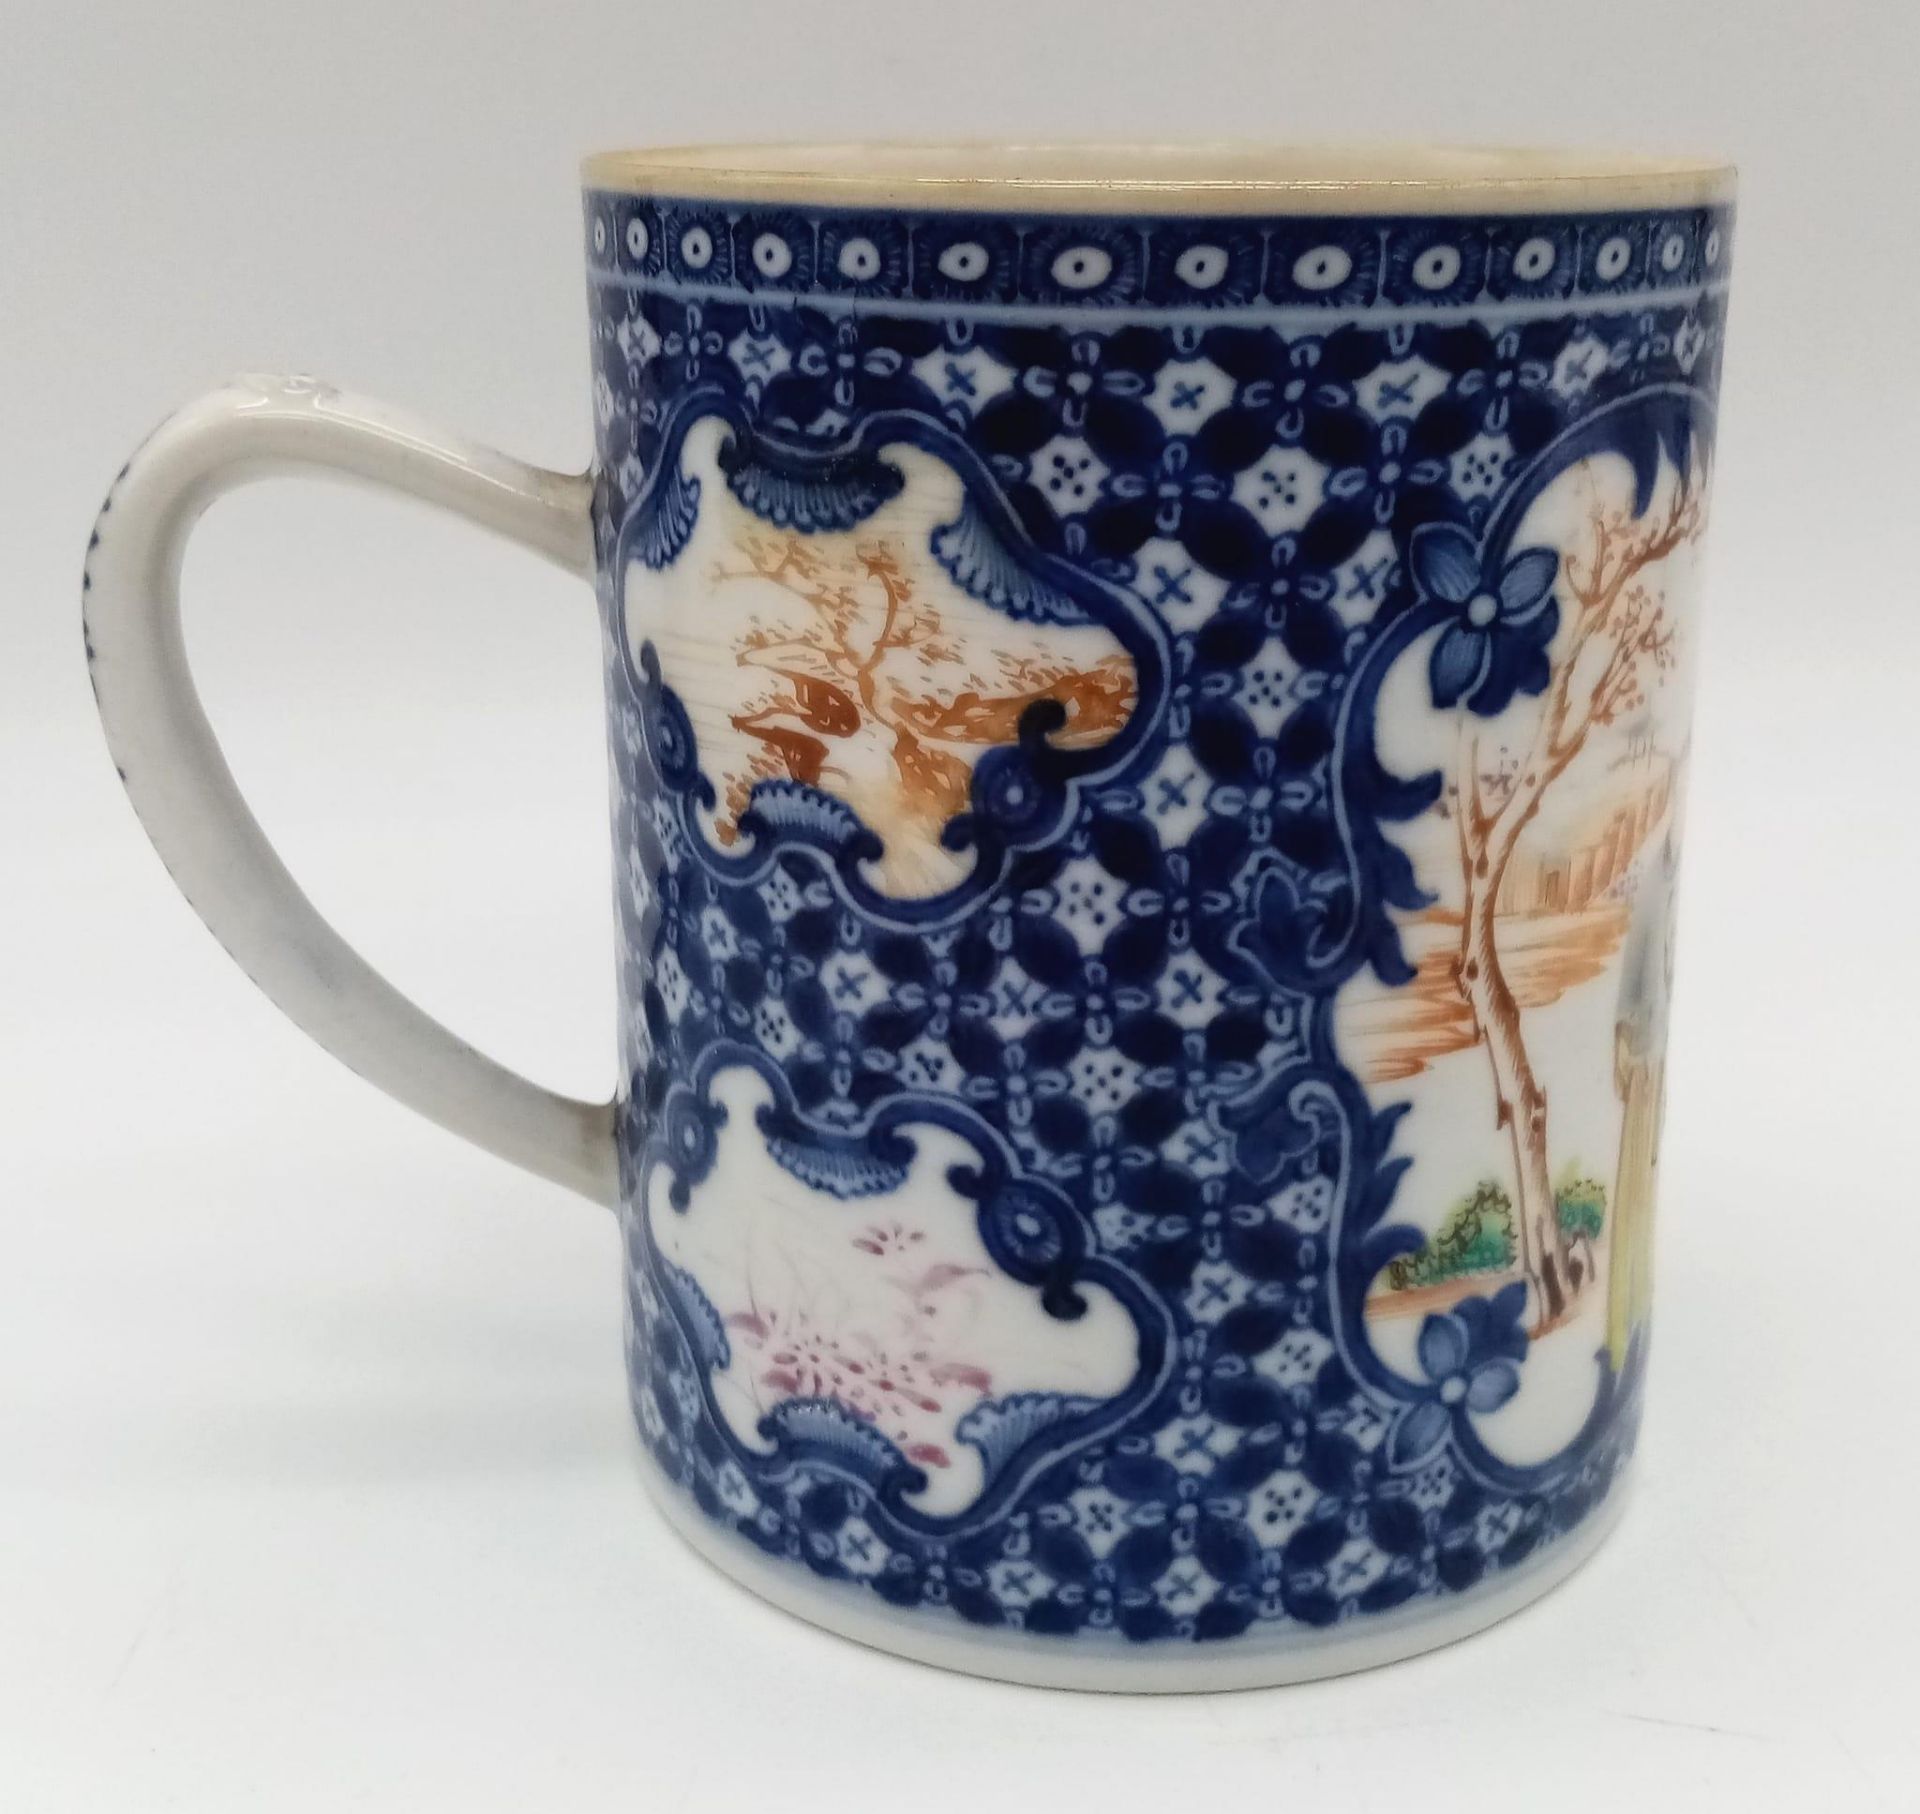 A large Antique 18th Century Chinese Hand-Painted Famille Rose mug - with a family garden scene. - Image 3 of 5